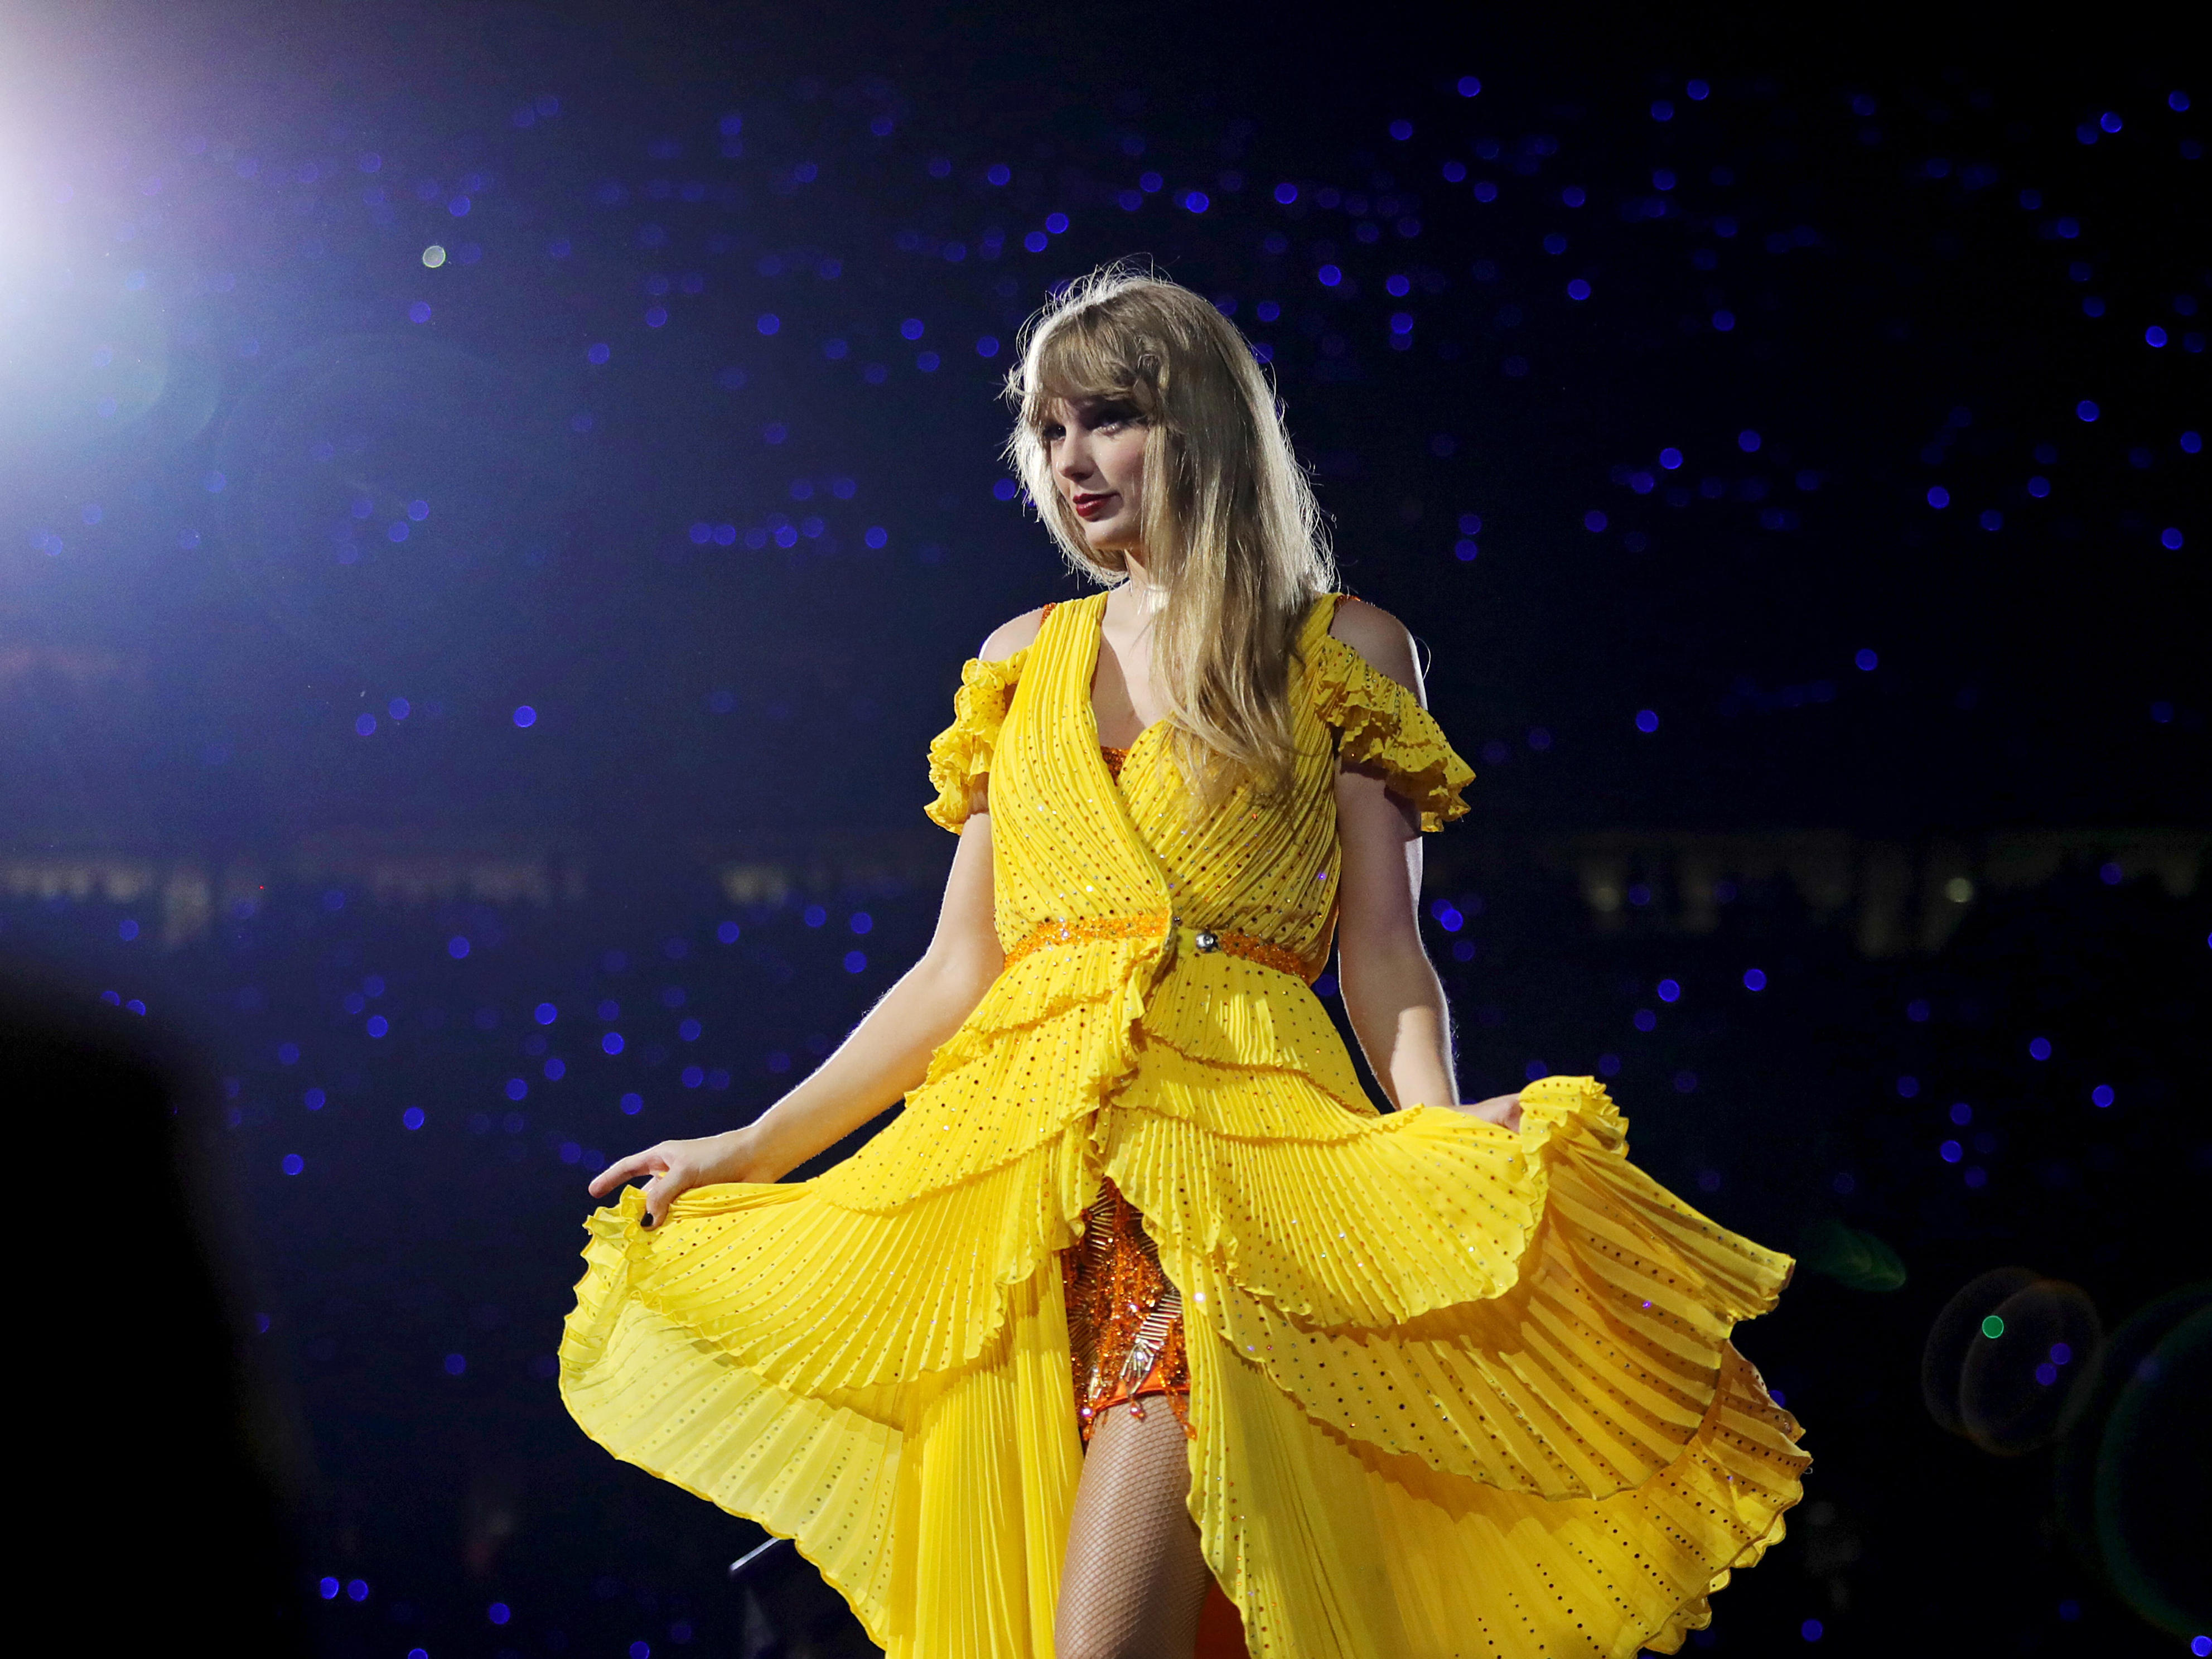 <p>Each night during the Eras Tour, Taylor Swift performs <a href="https://www.insider.com/taylor-swift-eras-tour-surprise-songs-acoustic-2023-4">an acoustic set with two surprise songs</a>.</p><p>The dress for this segment is designed for a quick change; Swift slips it over the "1989" outfit while still on stage. It makes sense for the dress to be plain. But it doesn't make sense for the fabric to be the same color as Big Bird.</p><p>Frankly, the yellow dress is ugly. It's way too yellow.</p>